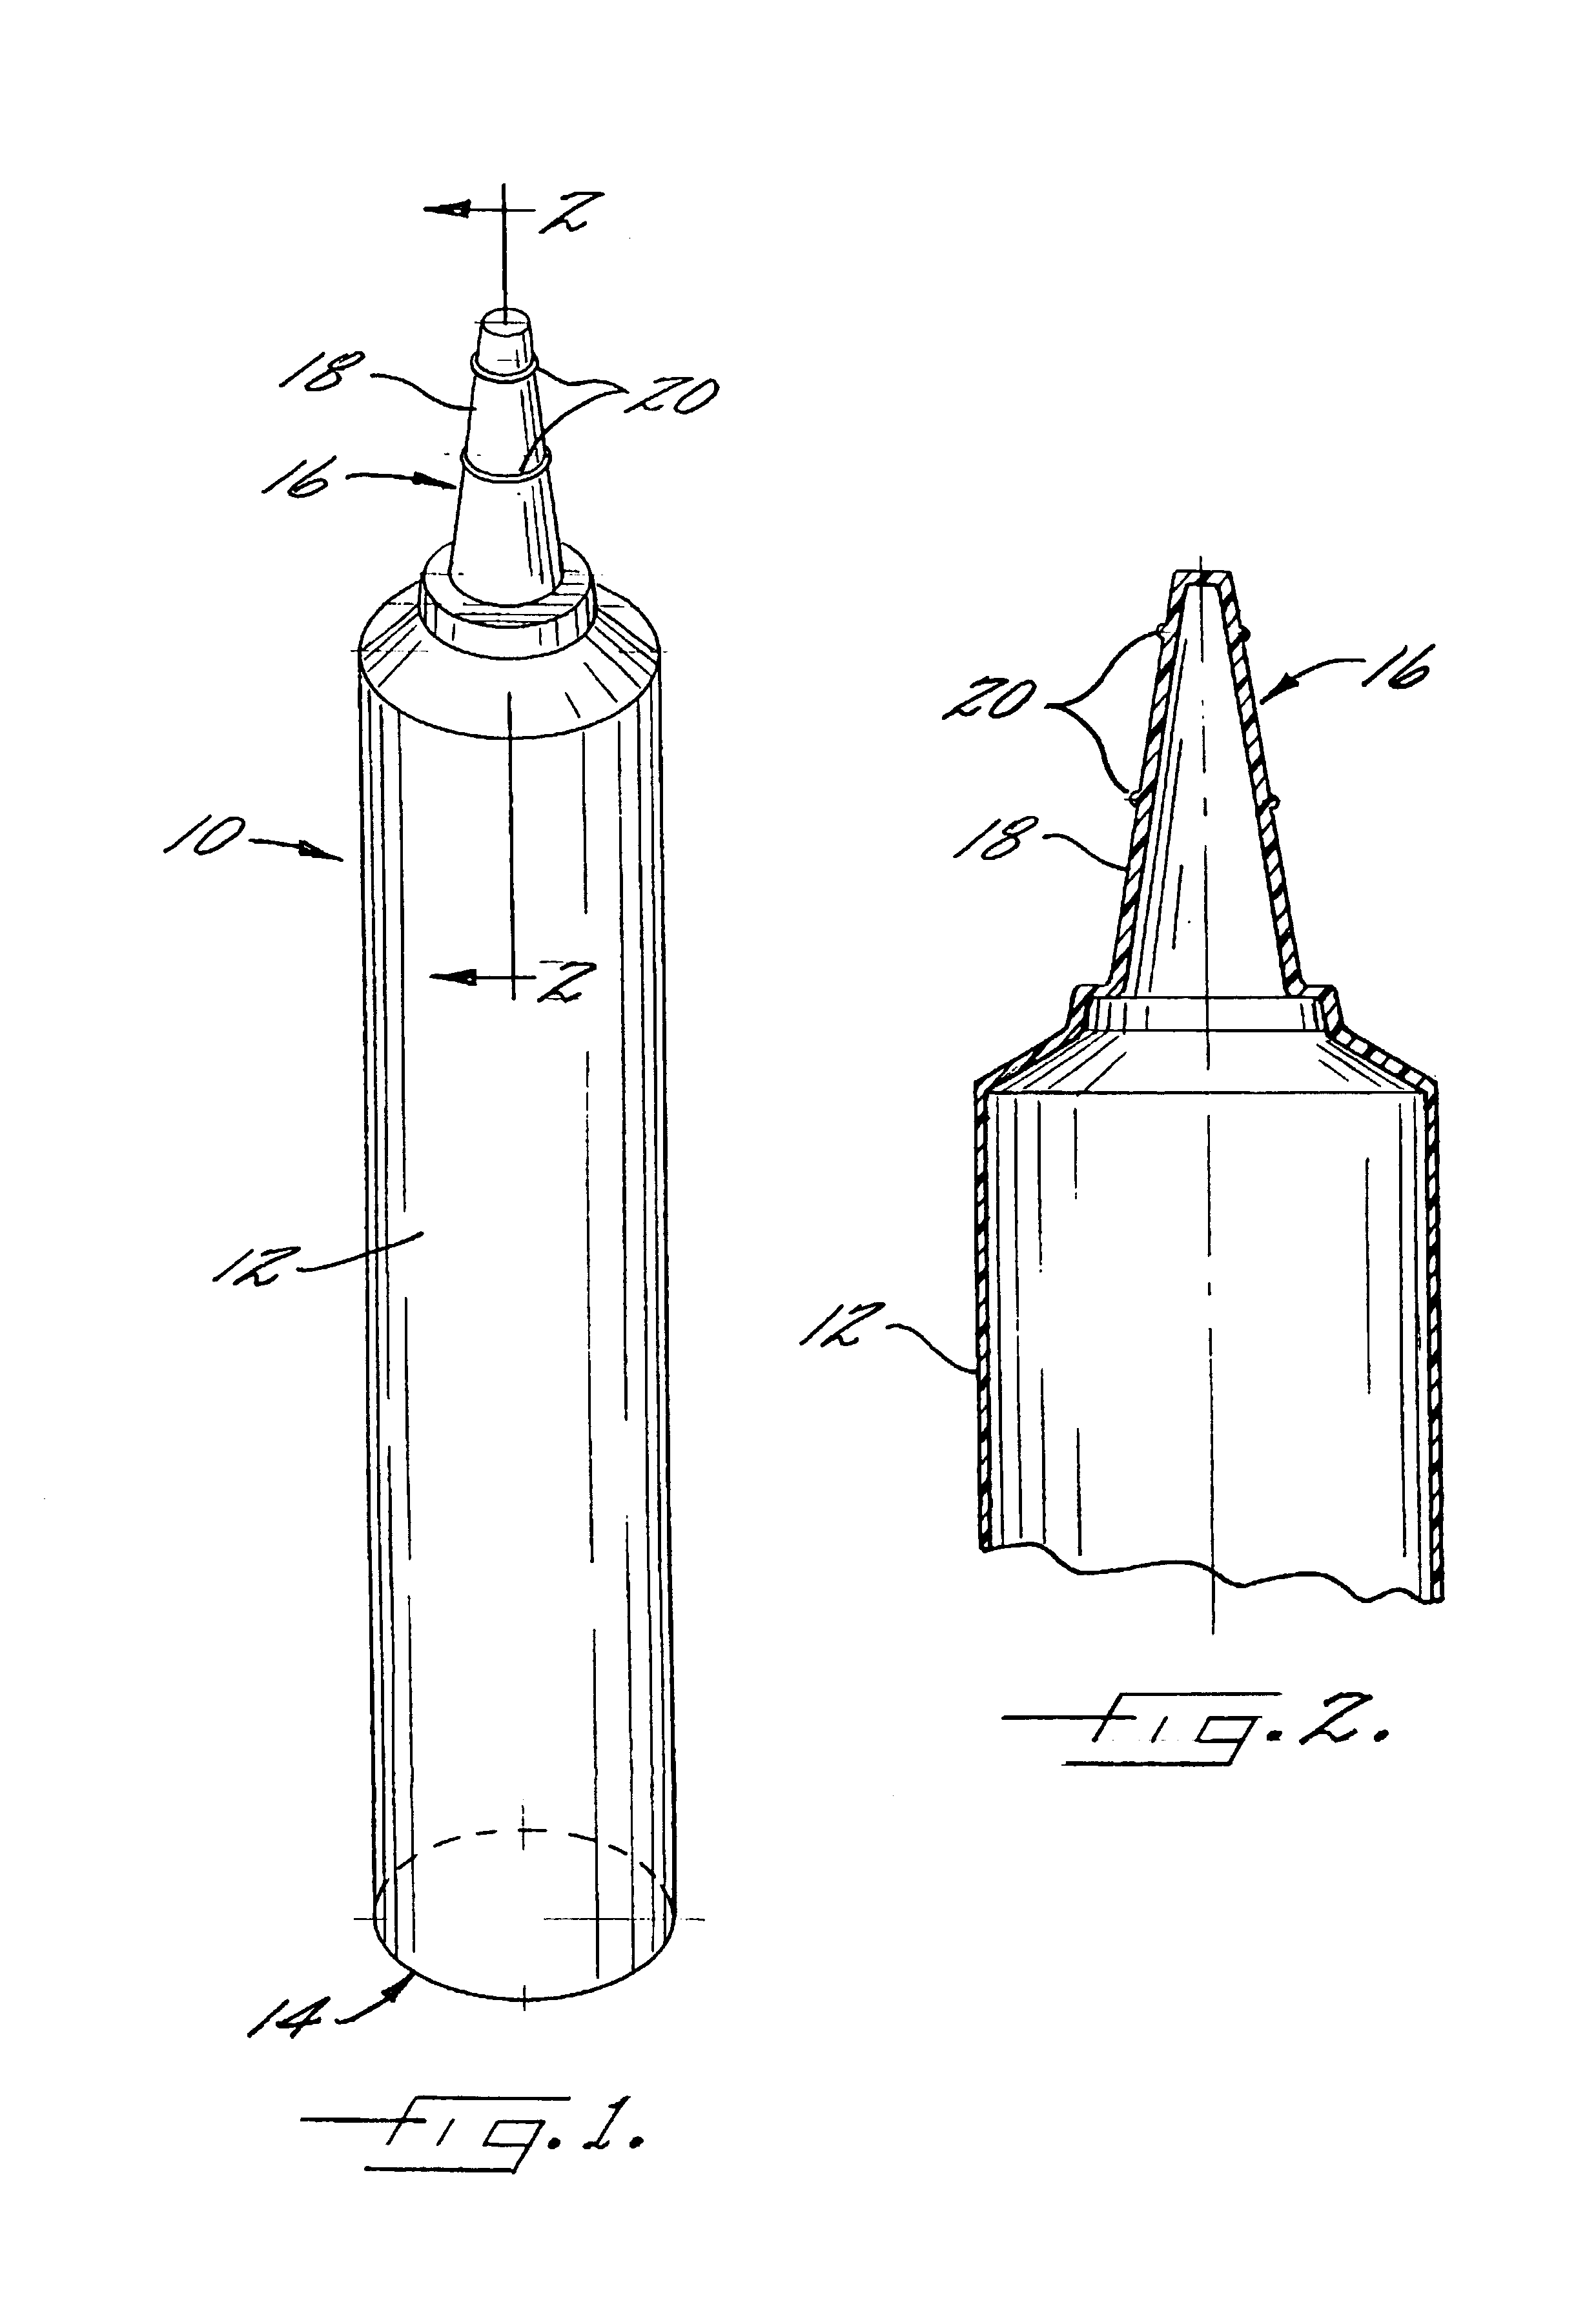 Composition for molding thin-walled parts, and injection-molded squeeze tube made thereof